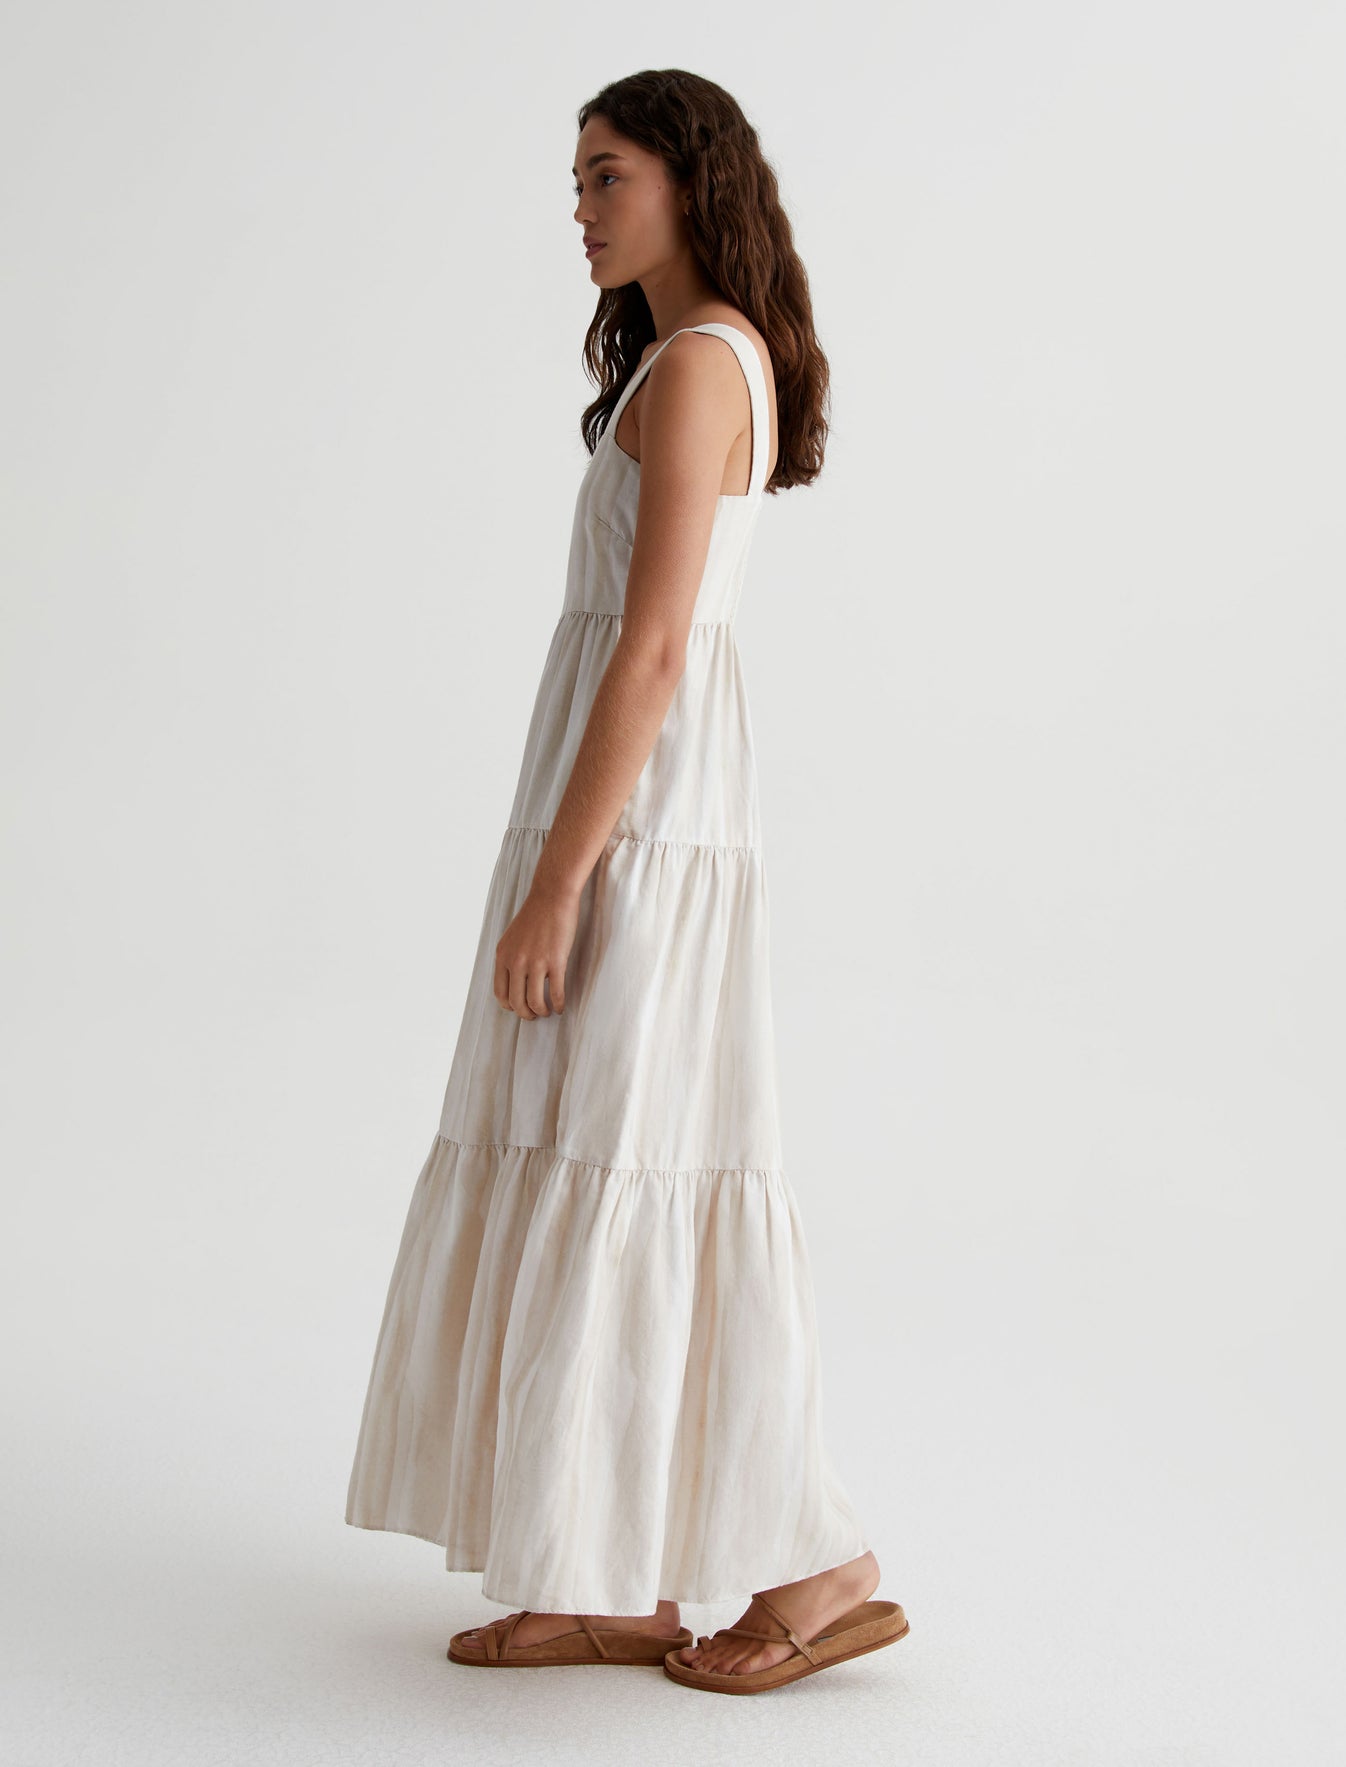 Audree Dress|Relaxed Maxi Dress